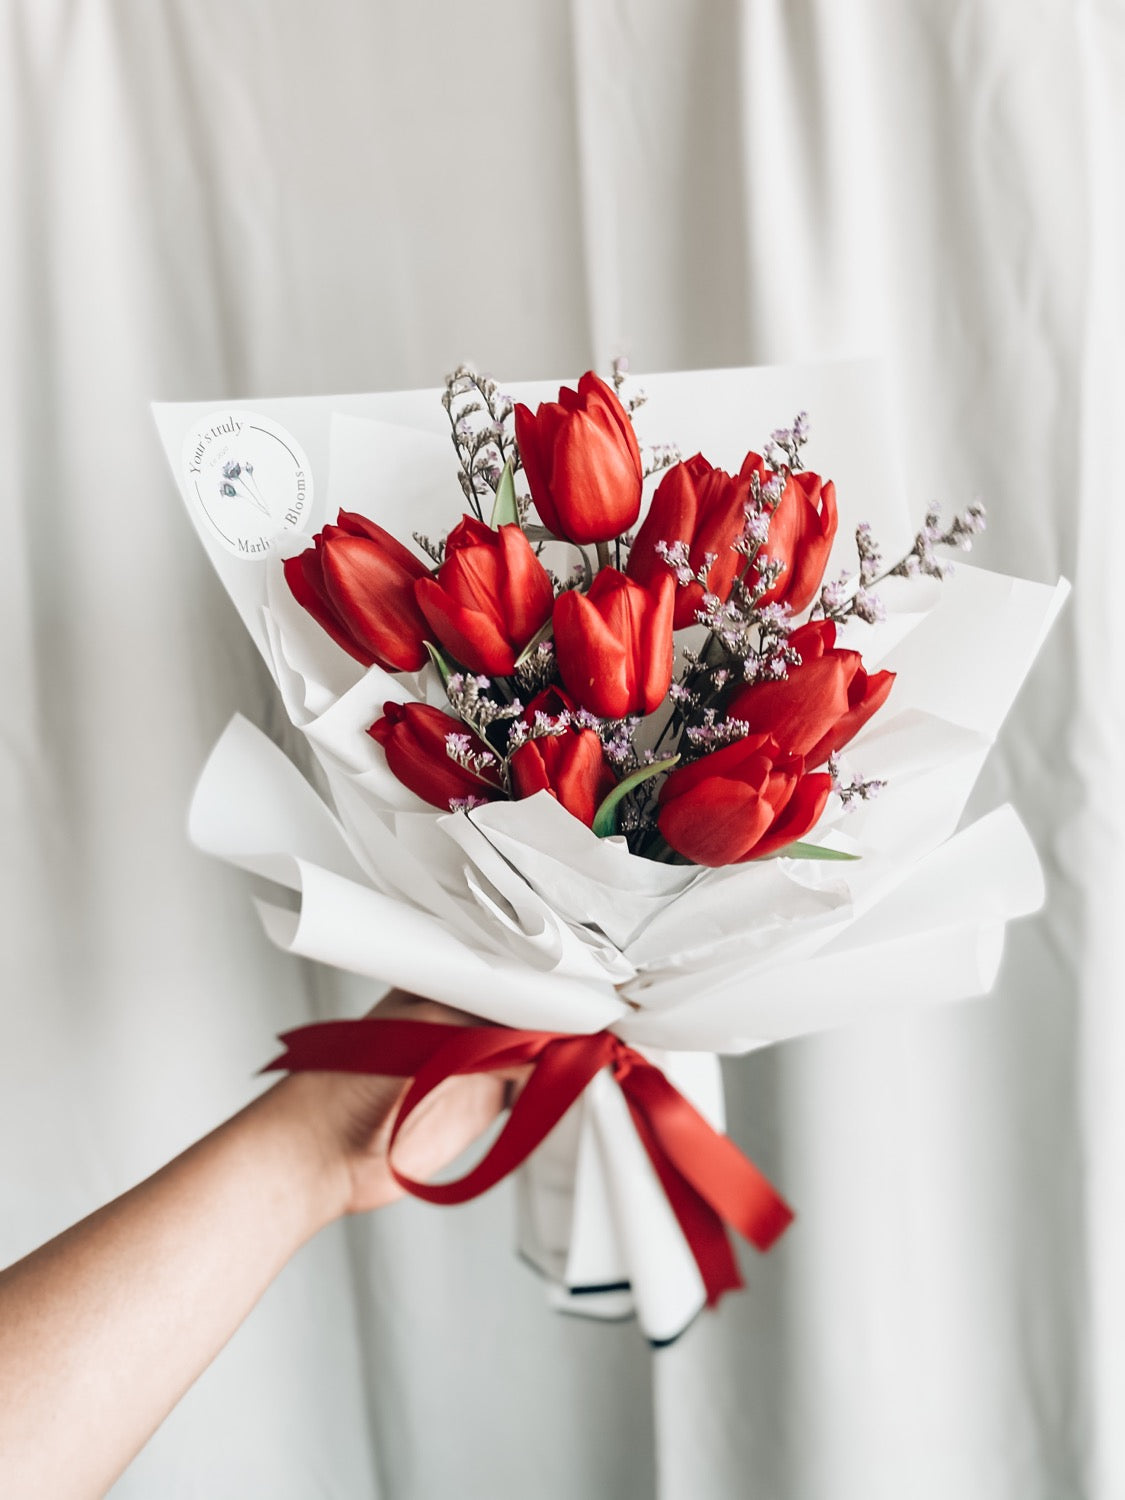 Any Day FloristEn Red D'Tulips
Other than the classic red roses why not red tulips? Red tulips are one of the popular choices among the romantics out there, their deep red tone relEn Red D'Tulips | Red Tulips Bouquet